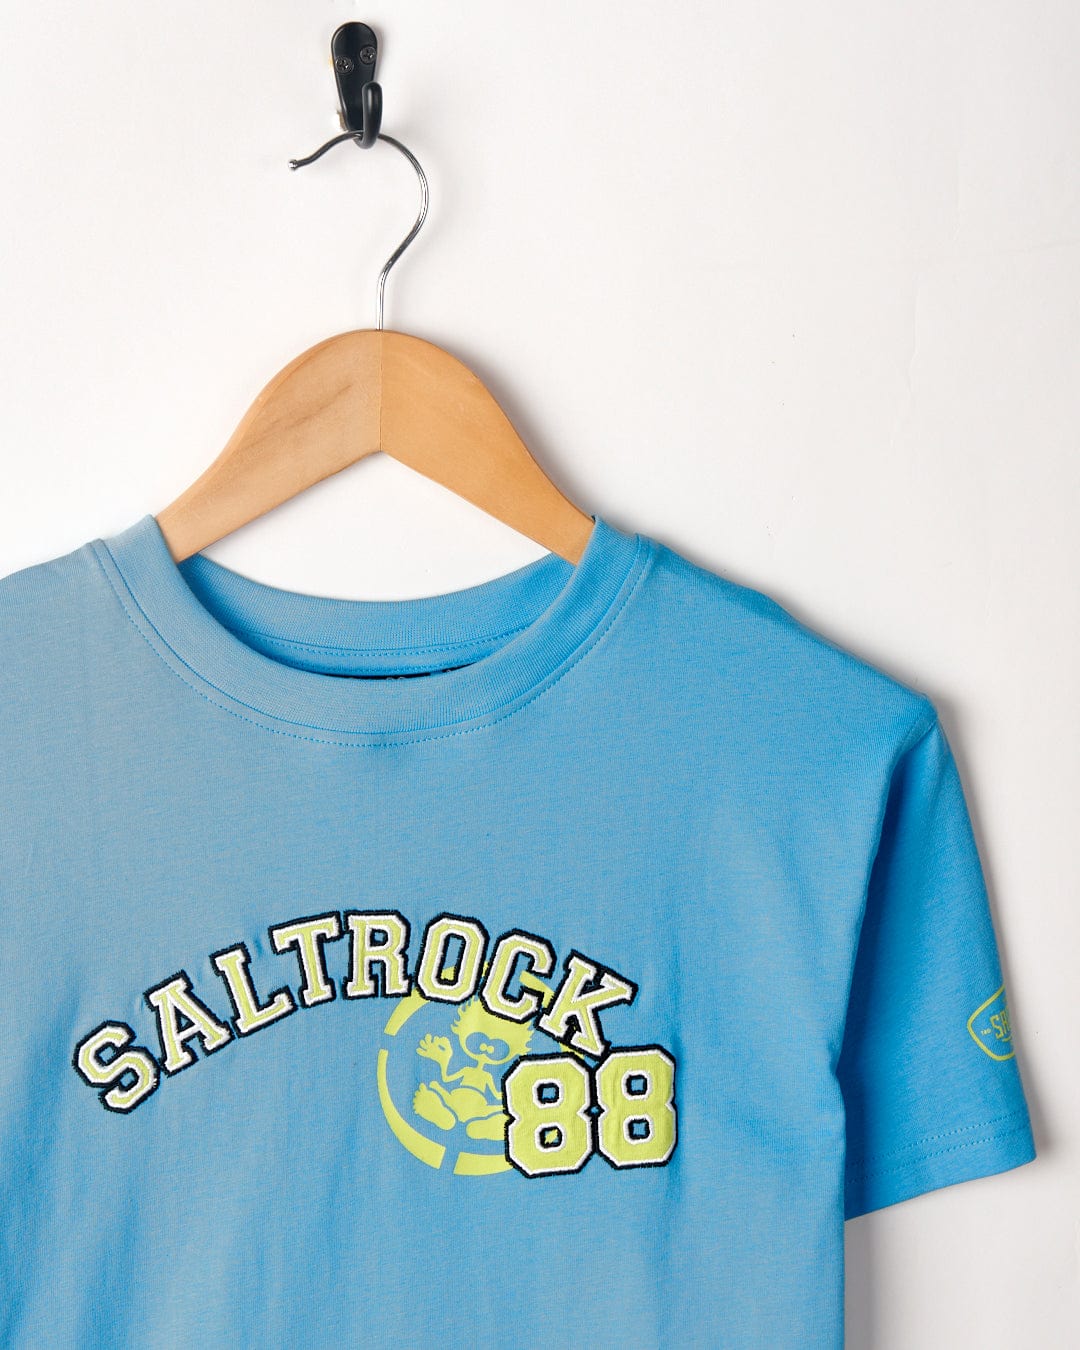 A blue Drop Out - Kids T-Shirt - Blue with "Saltrock 88" and a logo printed on the chest is hanging on a wooden hanger against a white wall. Made from 100% cotton, this stylish tee by Saltrock is not only comfortable but also machine washable for easy care.